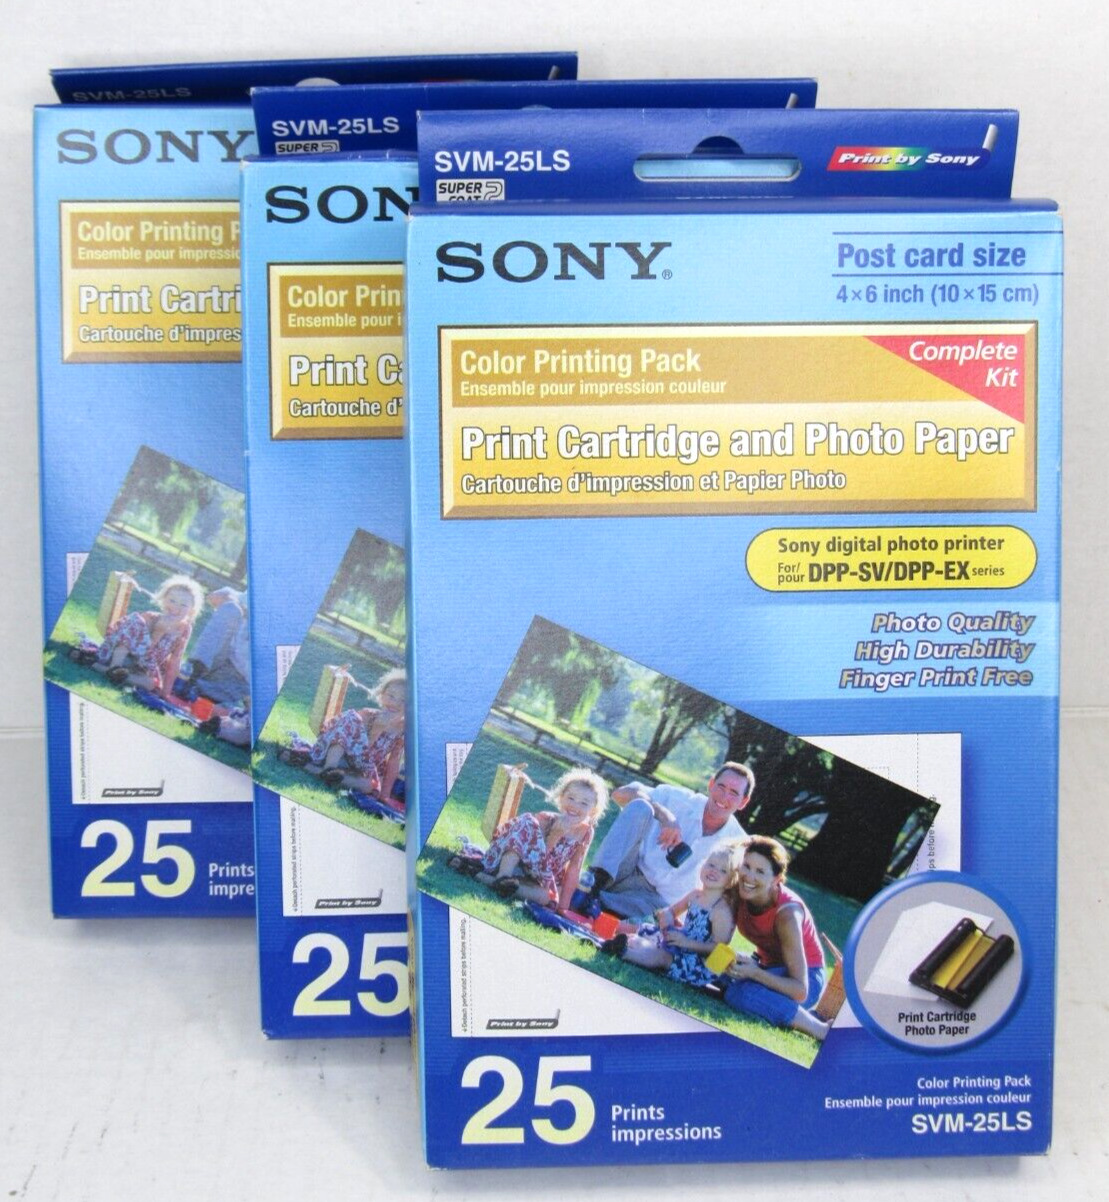 NEW 3 Sony Color Printing Pack Print Cartridge 25 Photo Paper 4x6 SVM-25LS Kit